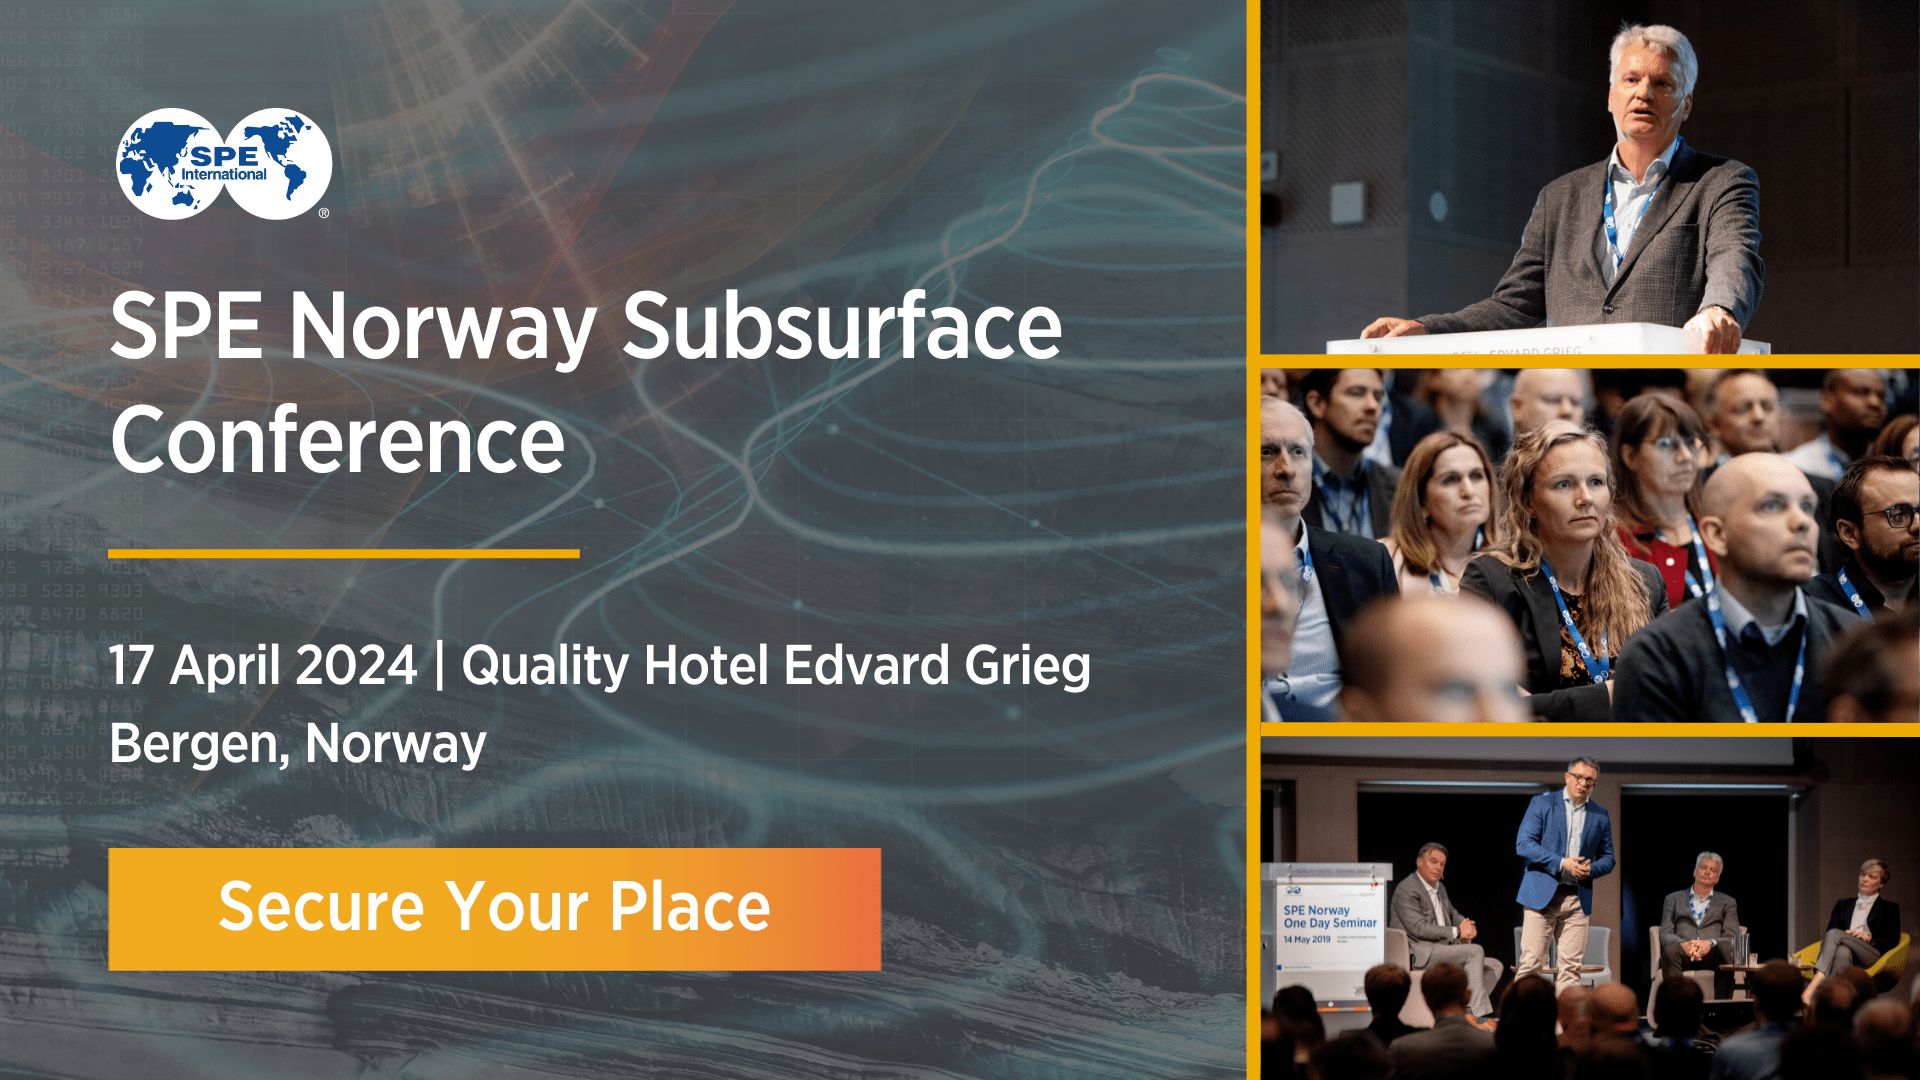 SPE Norway Subsurface Conference | 17 April 2024, Quality Hotel Edvard Grieg, Bergen, Norway, Sandsli, Norway